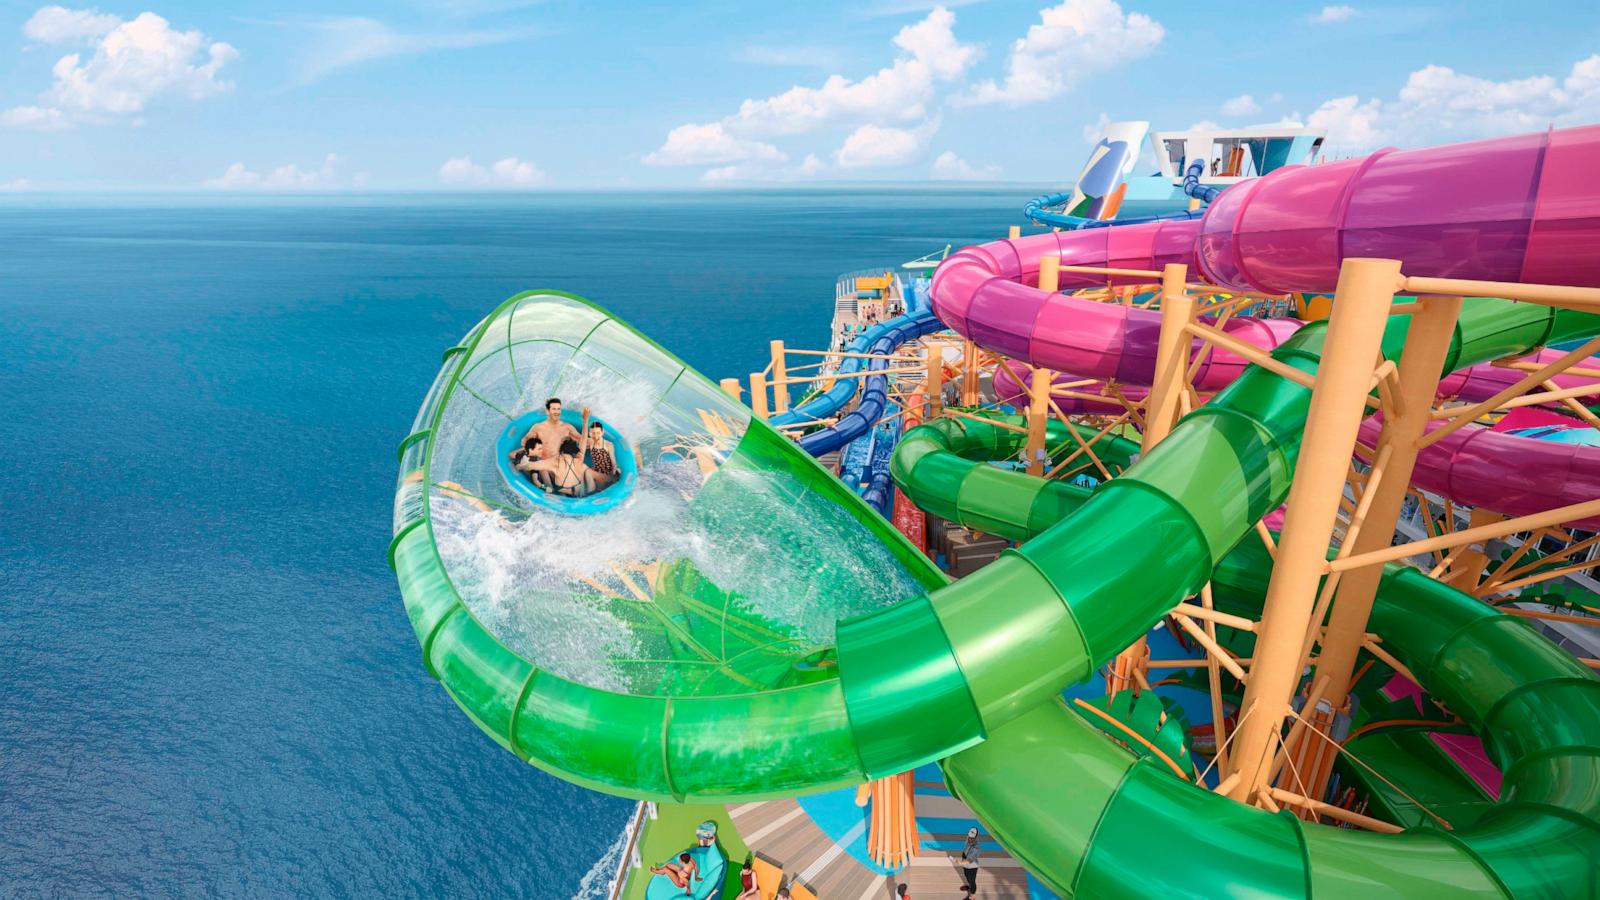 PHOTO: Royal Caribbean's Icon of the Seas features the largest water park at sea.